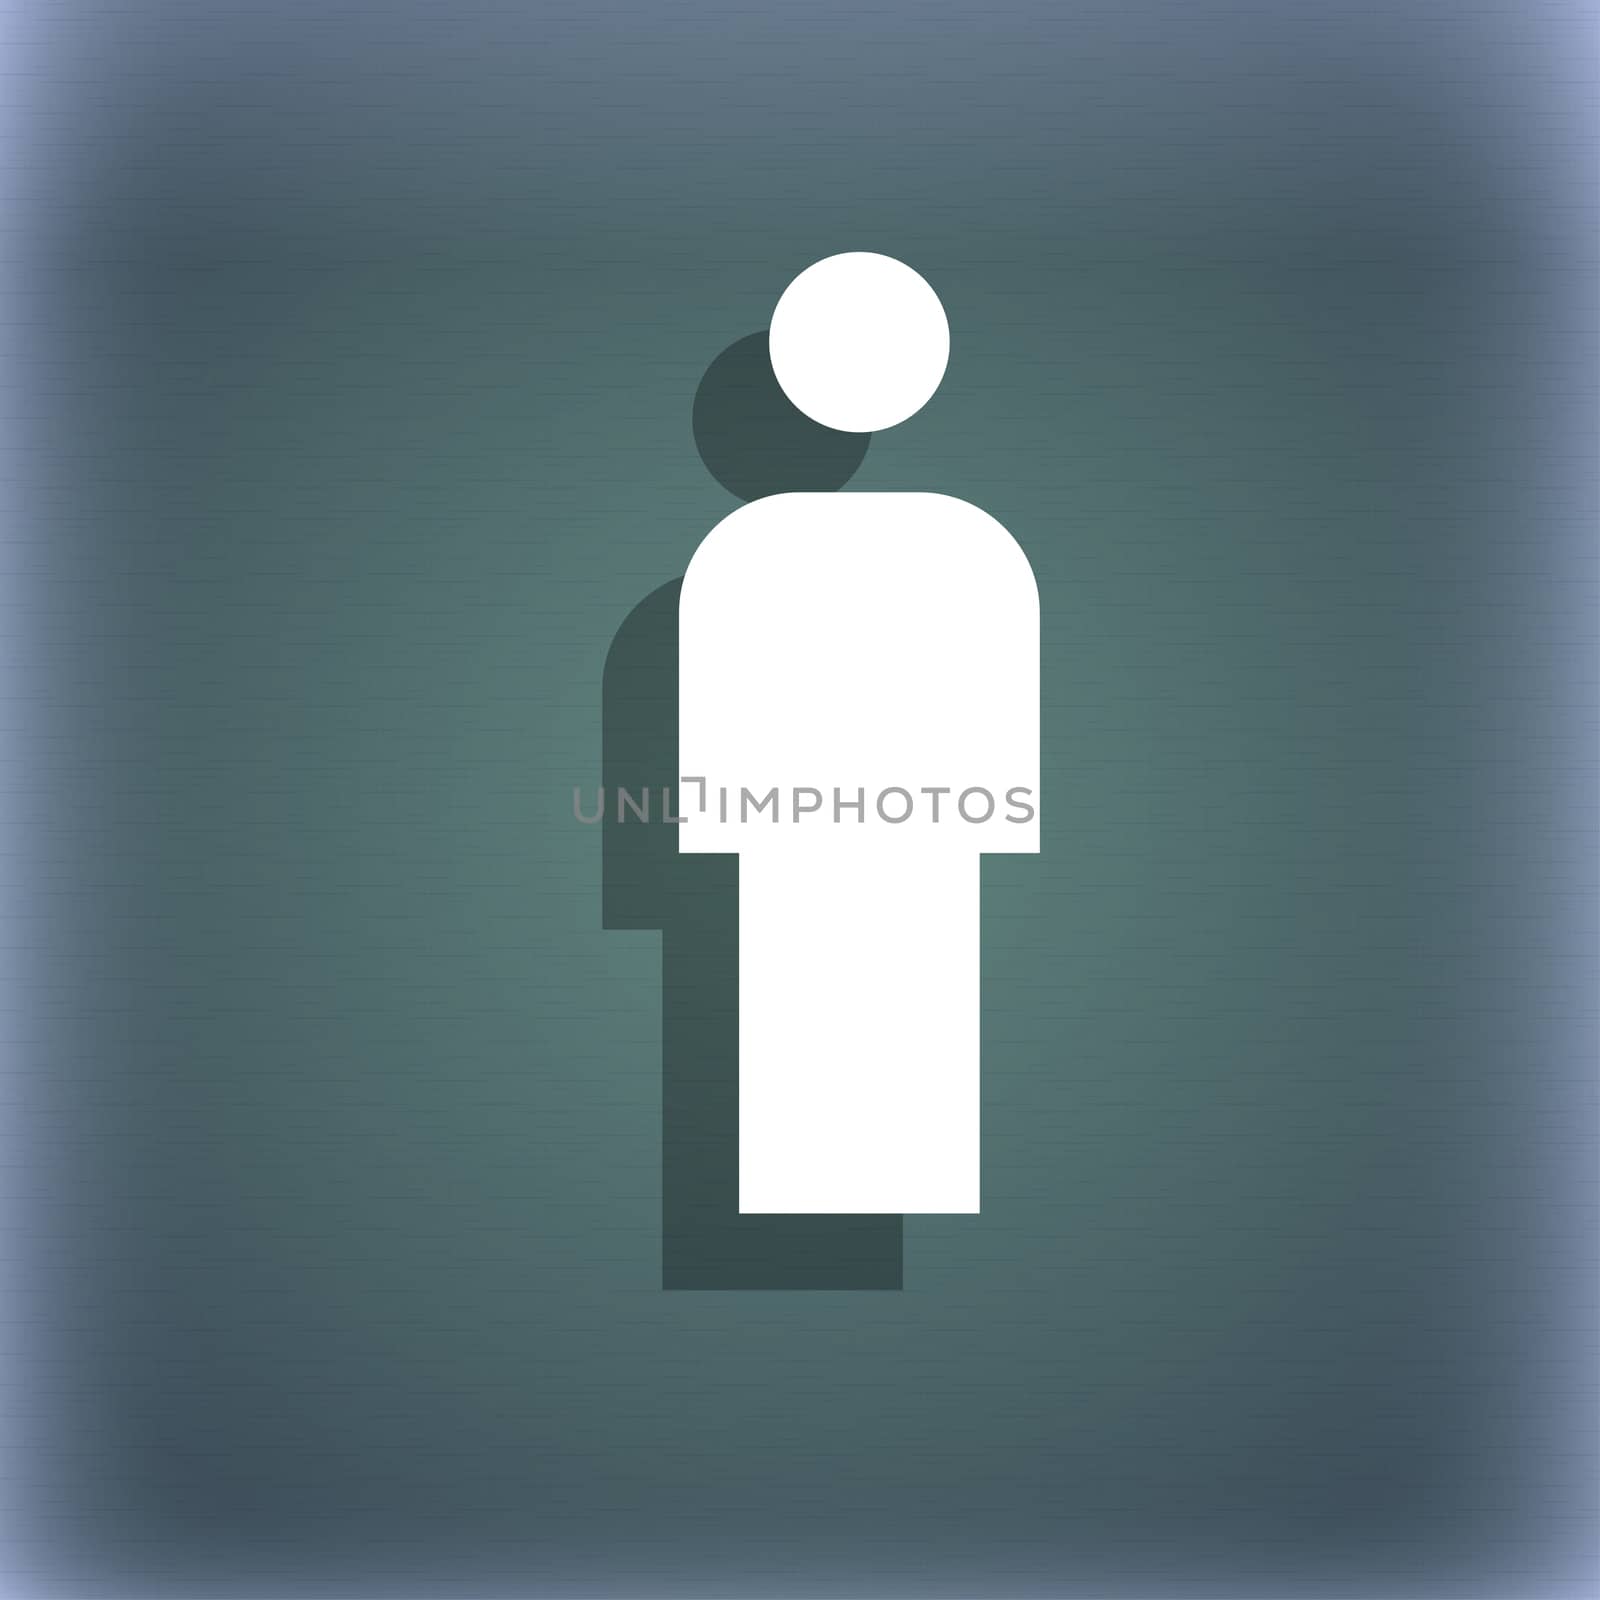 Human, Man Person, Male toilet icon symbol on the blue-green abstract background with shadow and space for your text.  by serhii_lohvyniuk